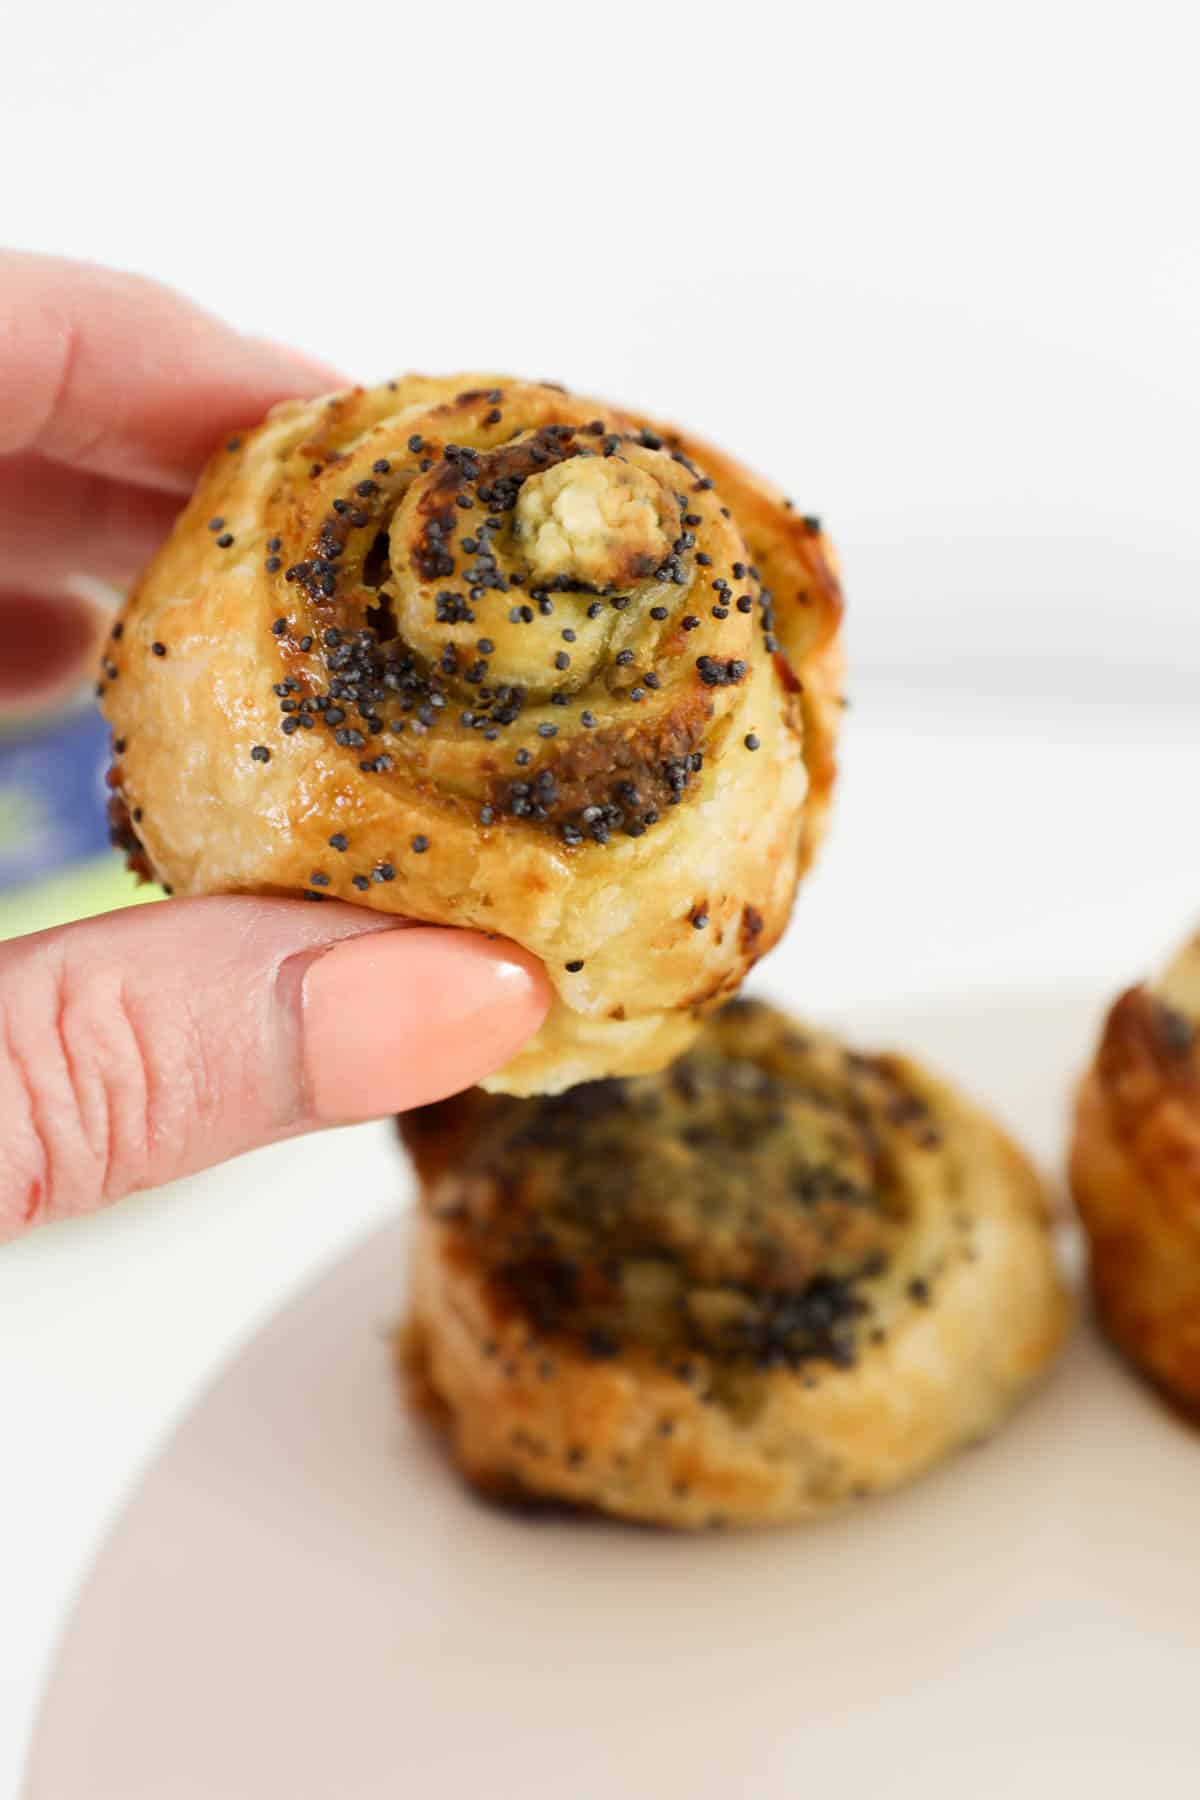 A hand holding up a golden baked pastry sprinkled with poppy seeds.